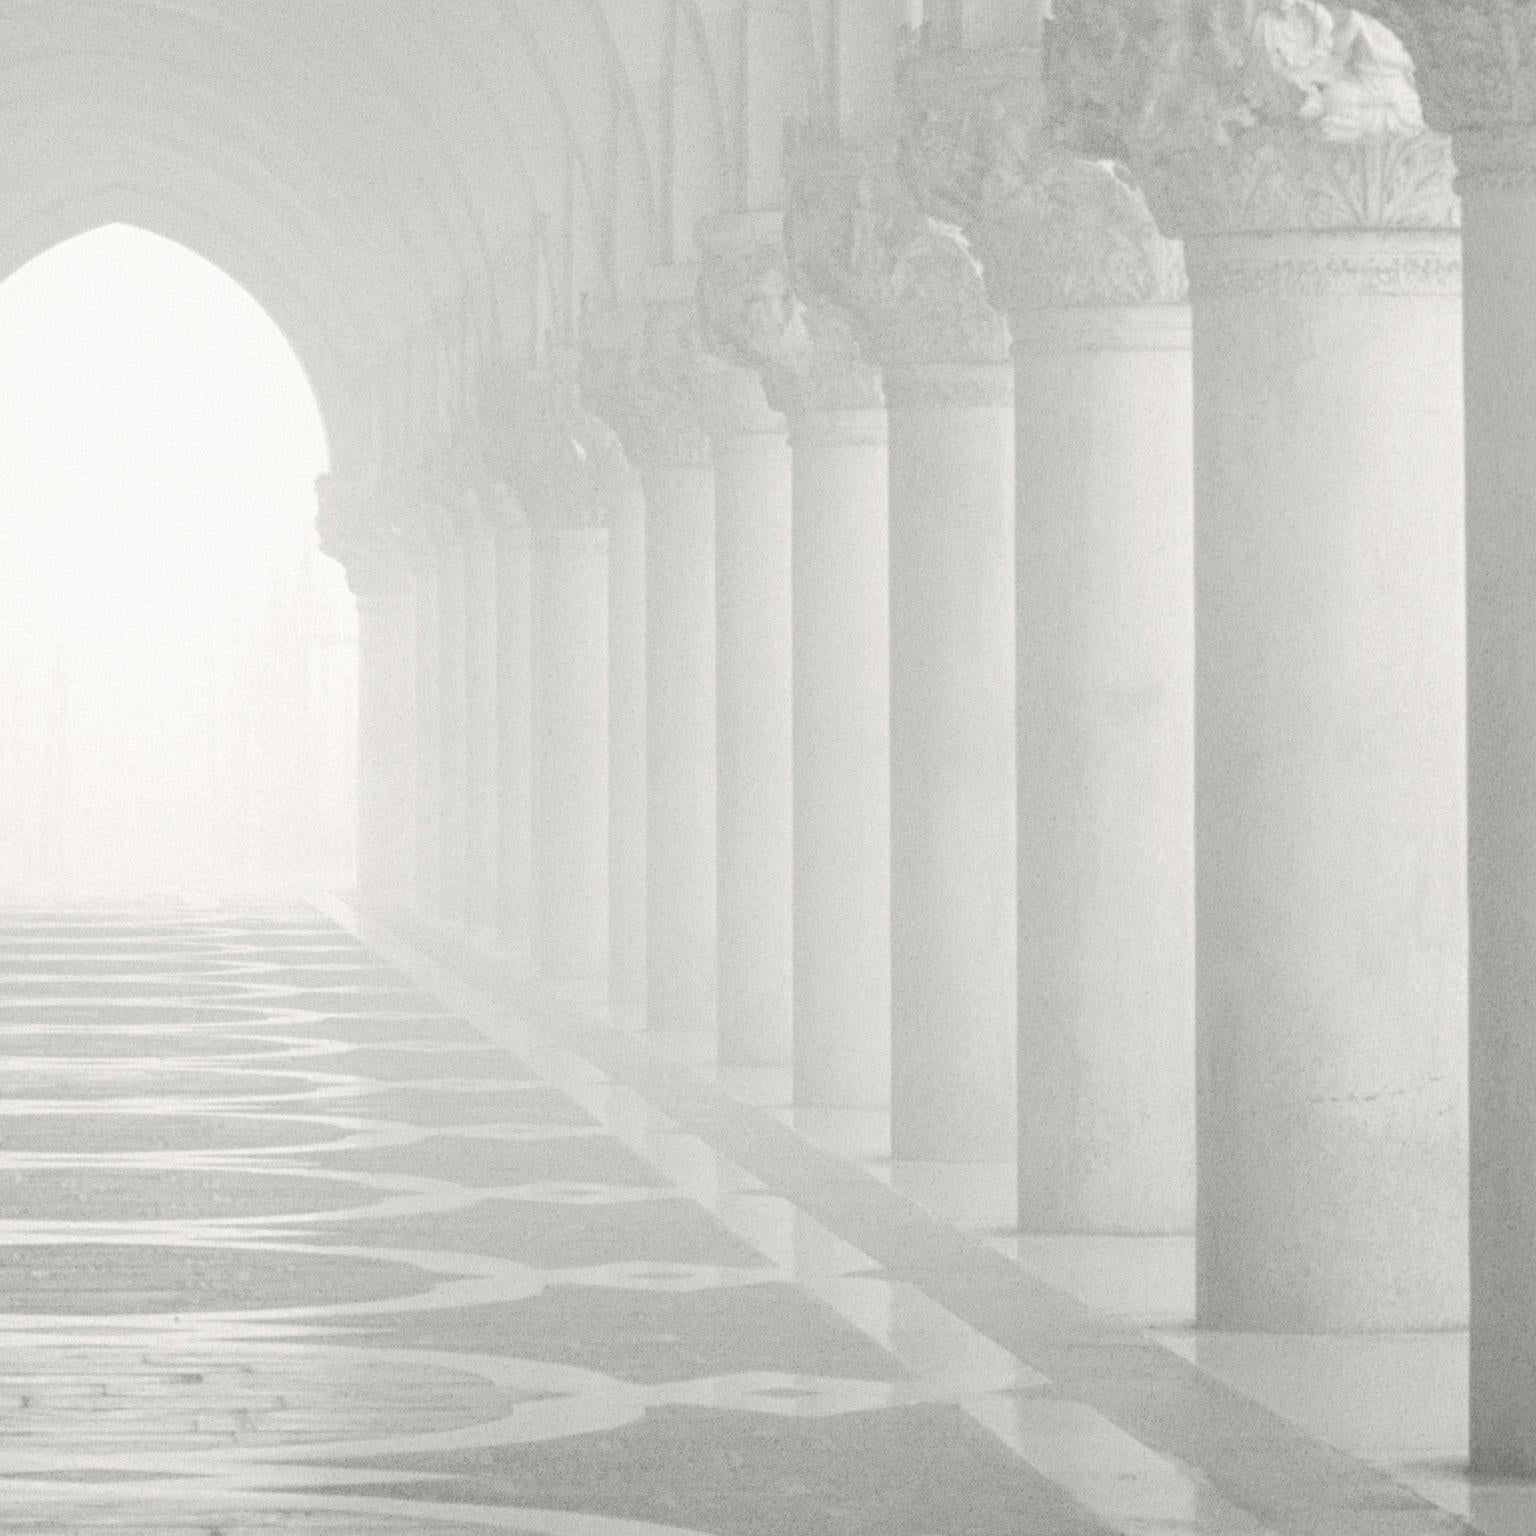 Columns and arches in misty fog, black and white.  Doges Palace, Venice, Italy 2004
Photograph by Cosmo Condina. Arched vaulted ceiling.
Archival pigment print 19 X 12.7 in. Edition of 10. This is # 3/10 in the edition.

Detail of Venetian Gothic